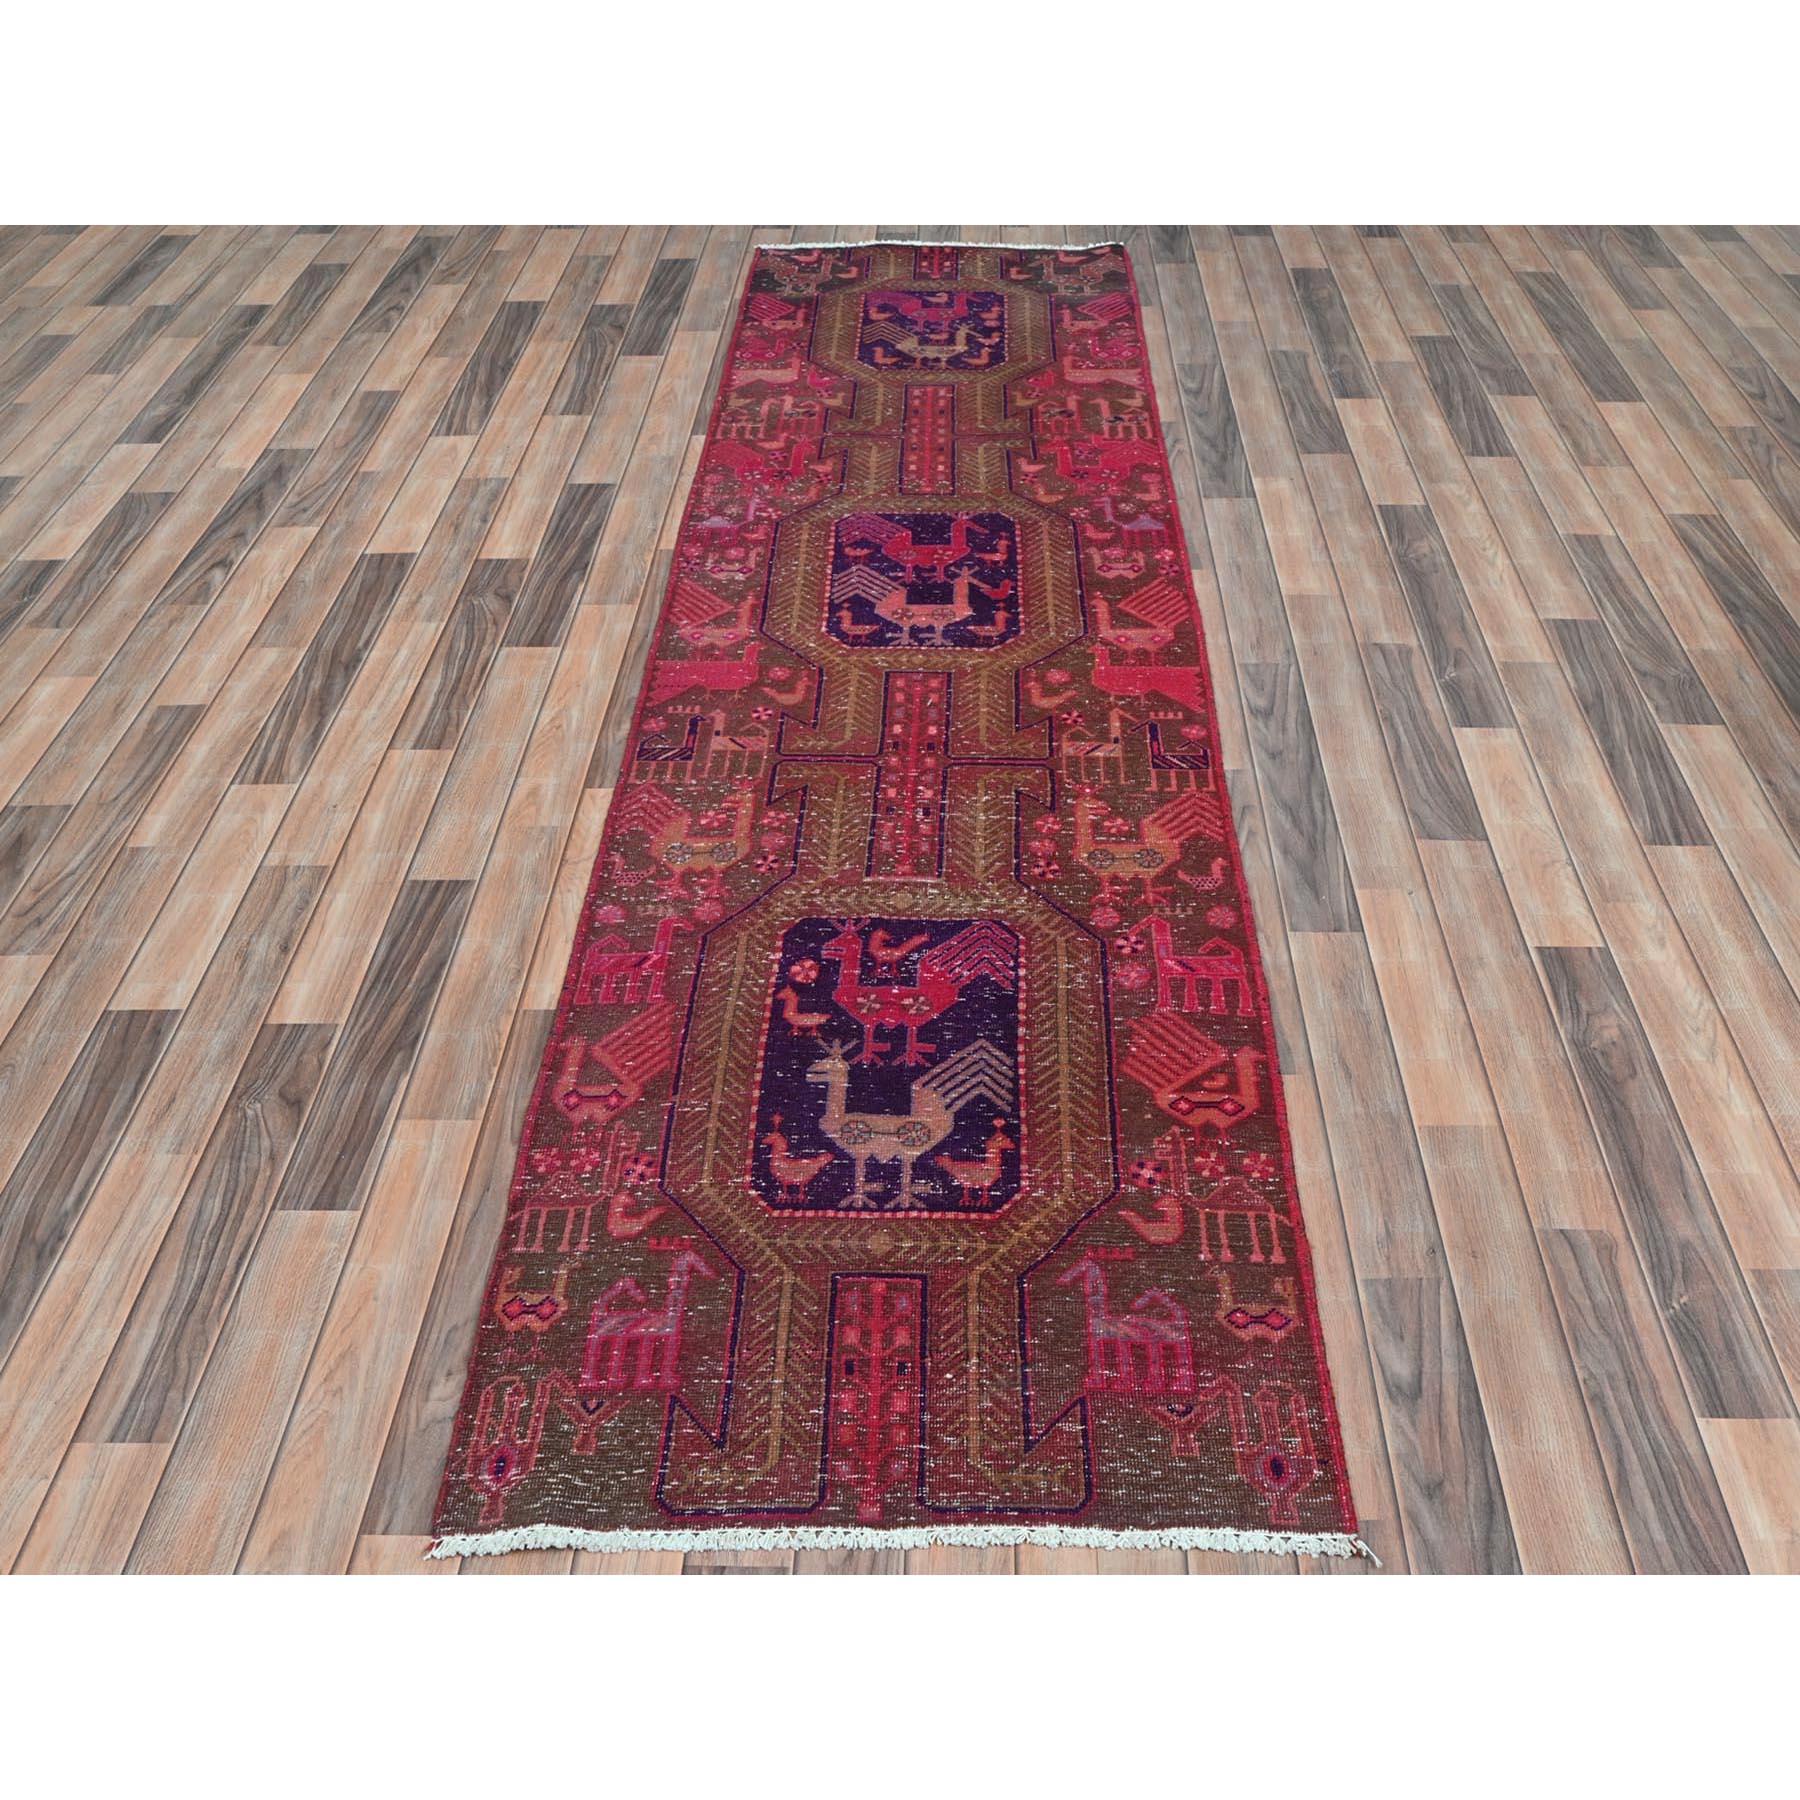 This fabulous Hand-Knotted carpet has been created and designed for extra strength and durability. This rug has been handcrafted for weeks in the traditional method that is used to make
Exact rug size in feet and inches : 2'9